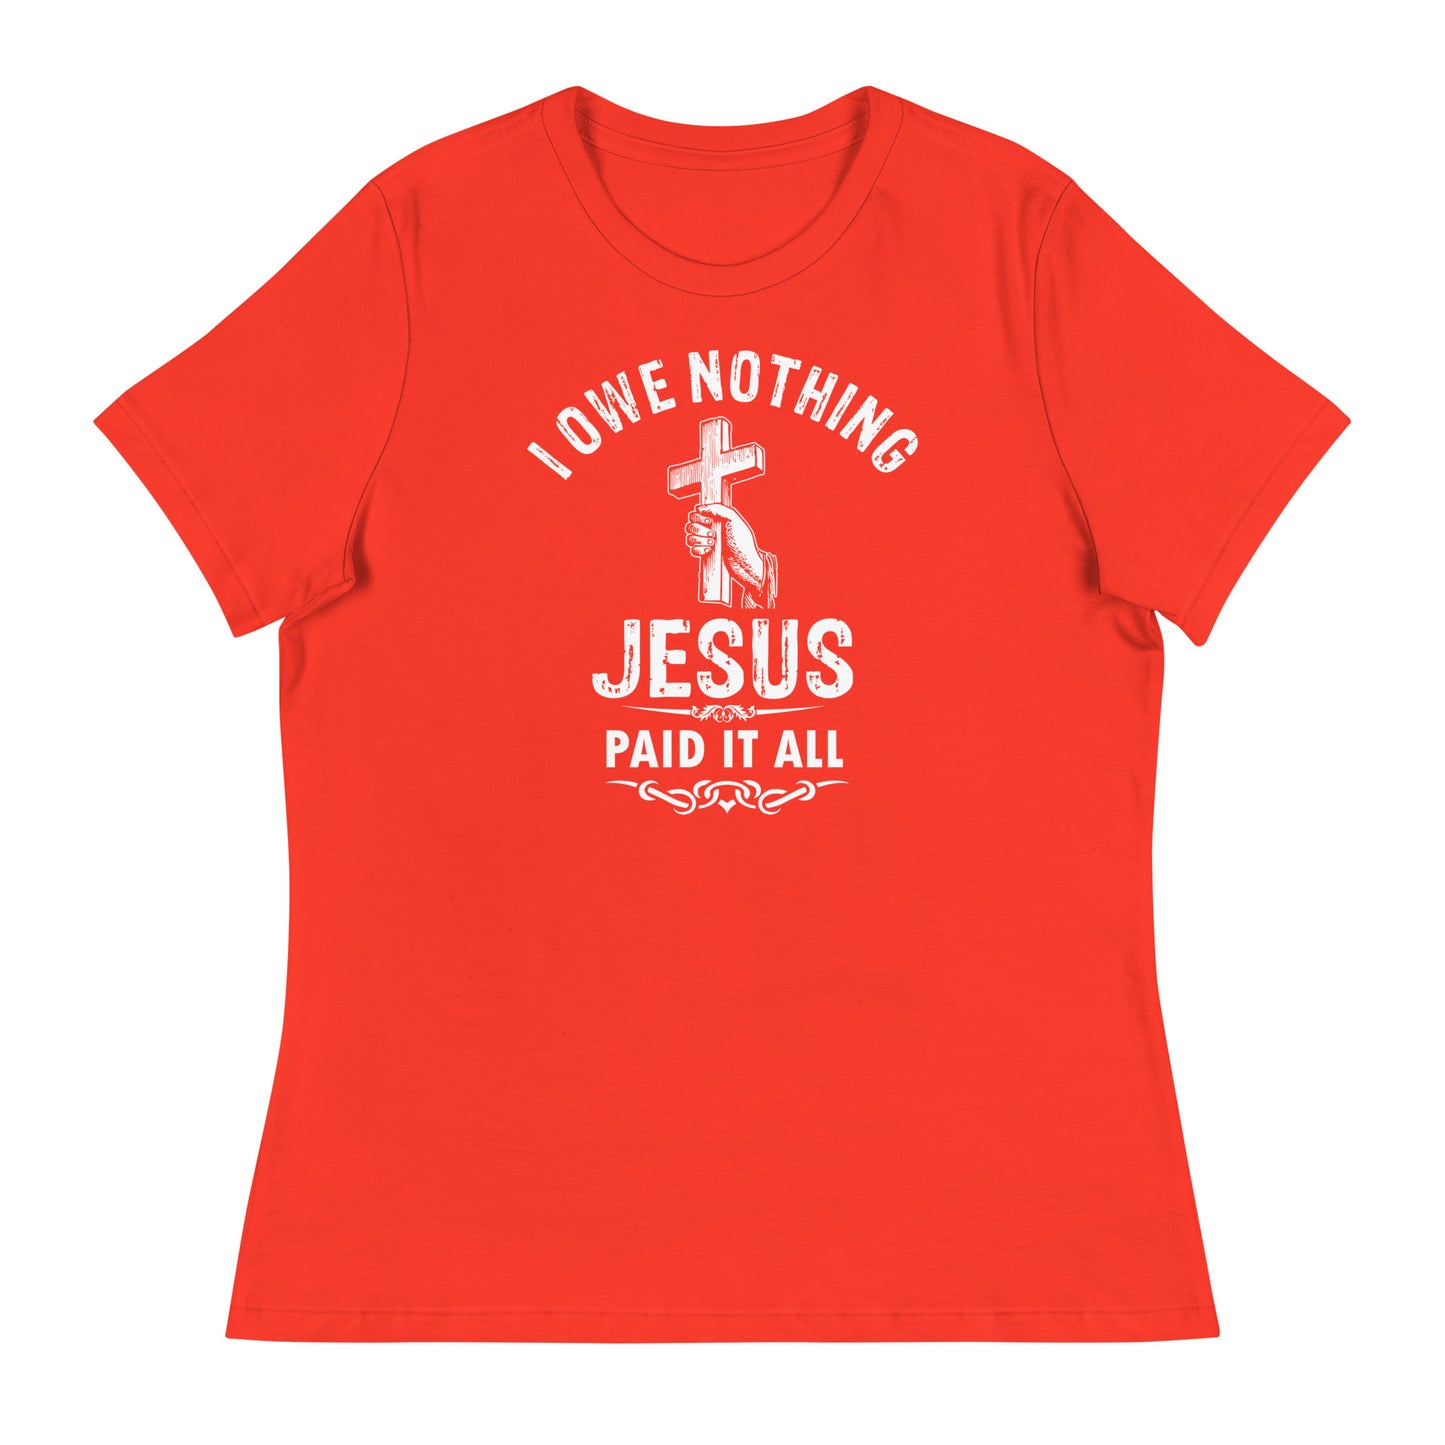 I Owe Nothing - Women's Relaxed T-Shirt